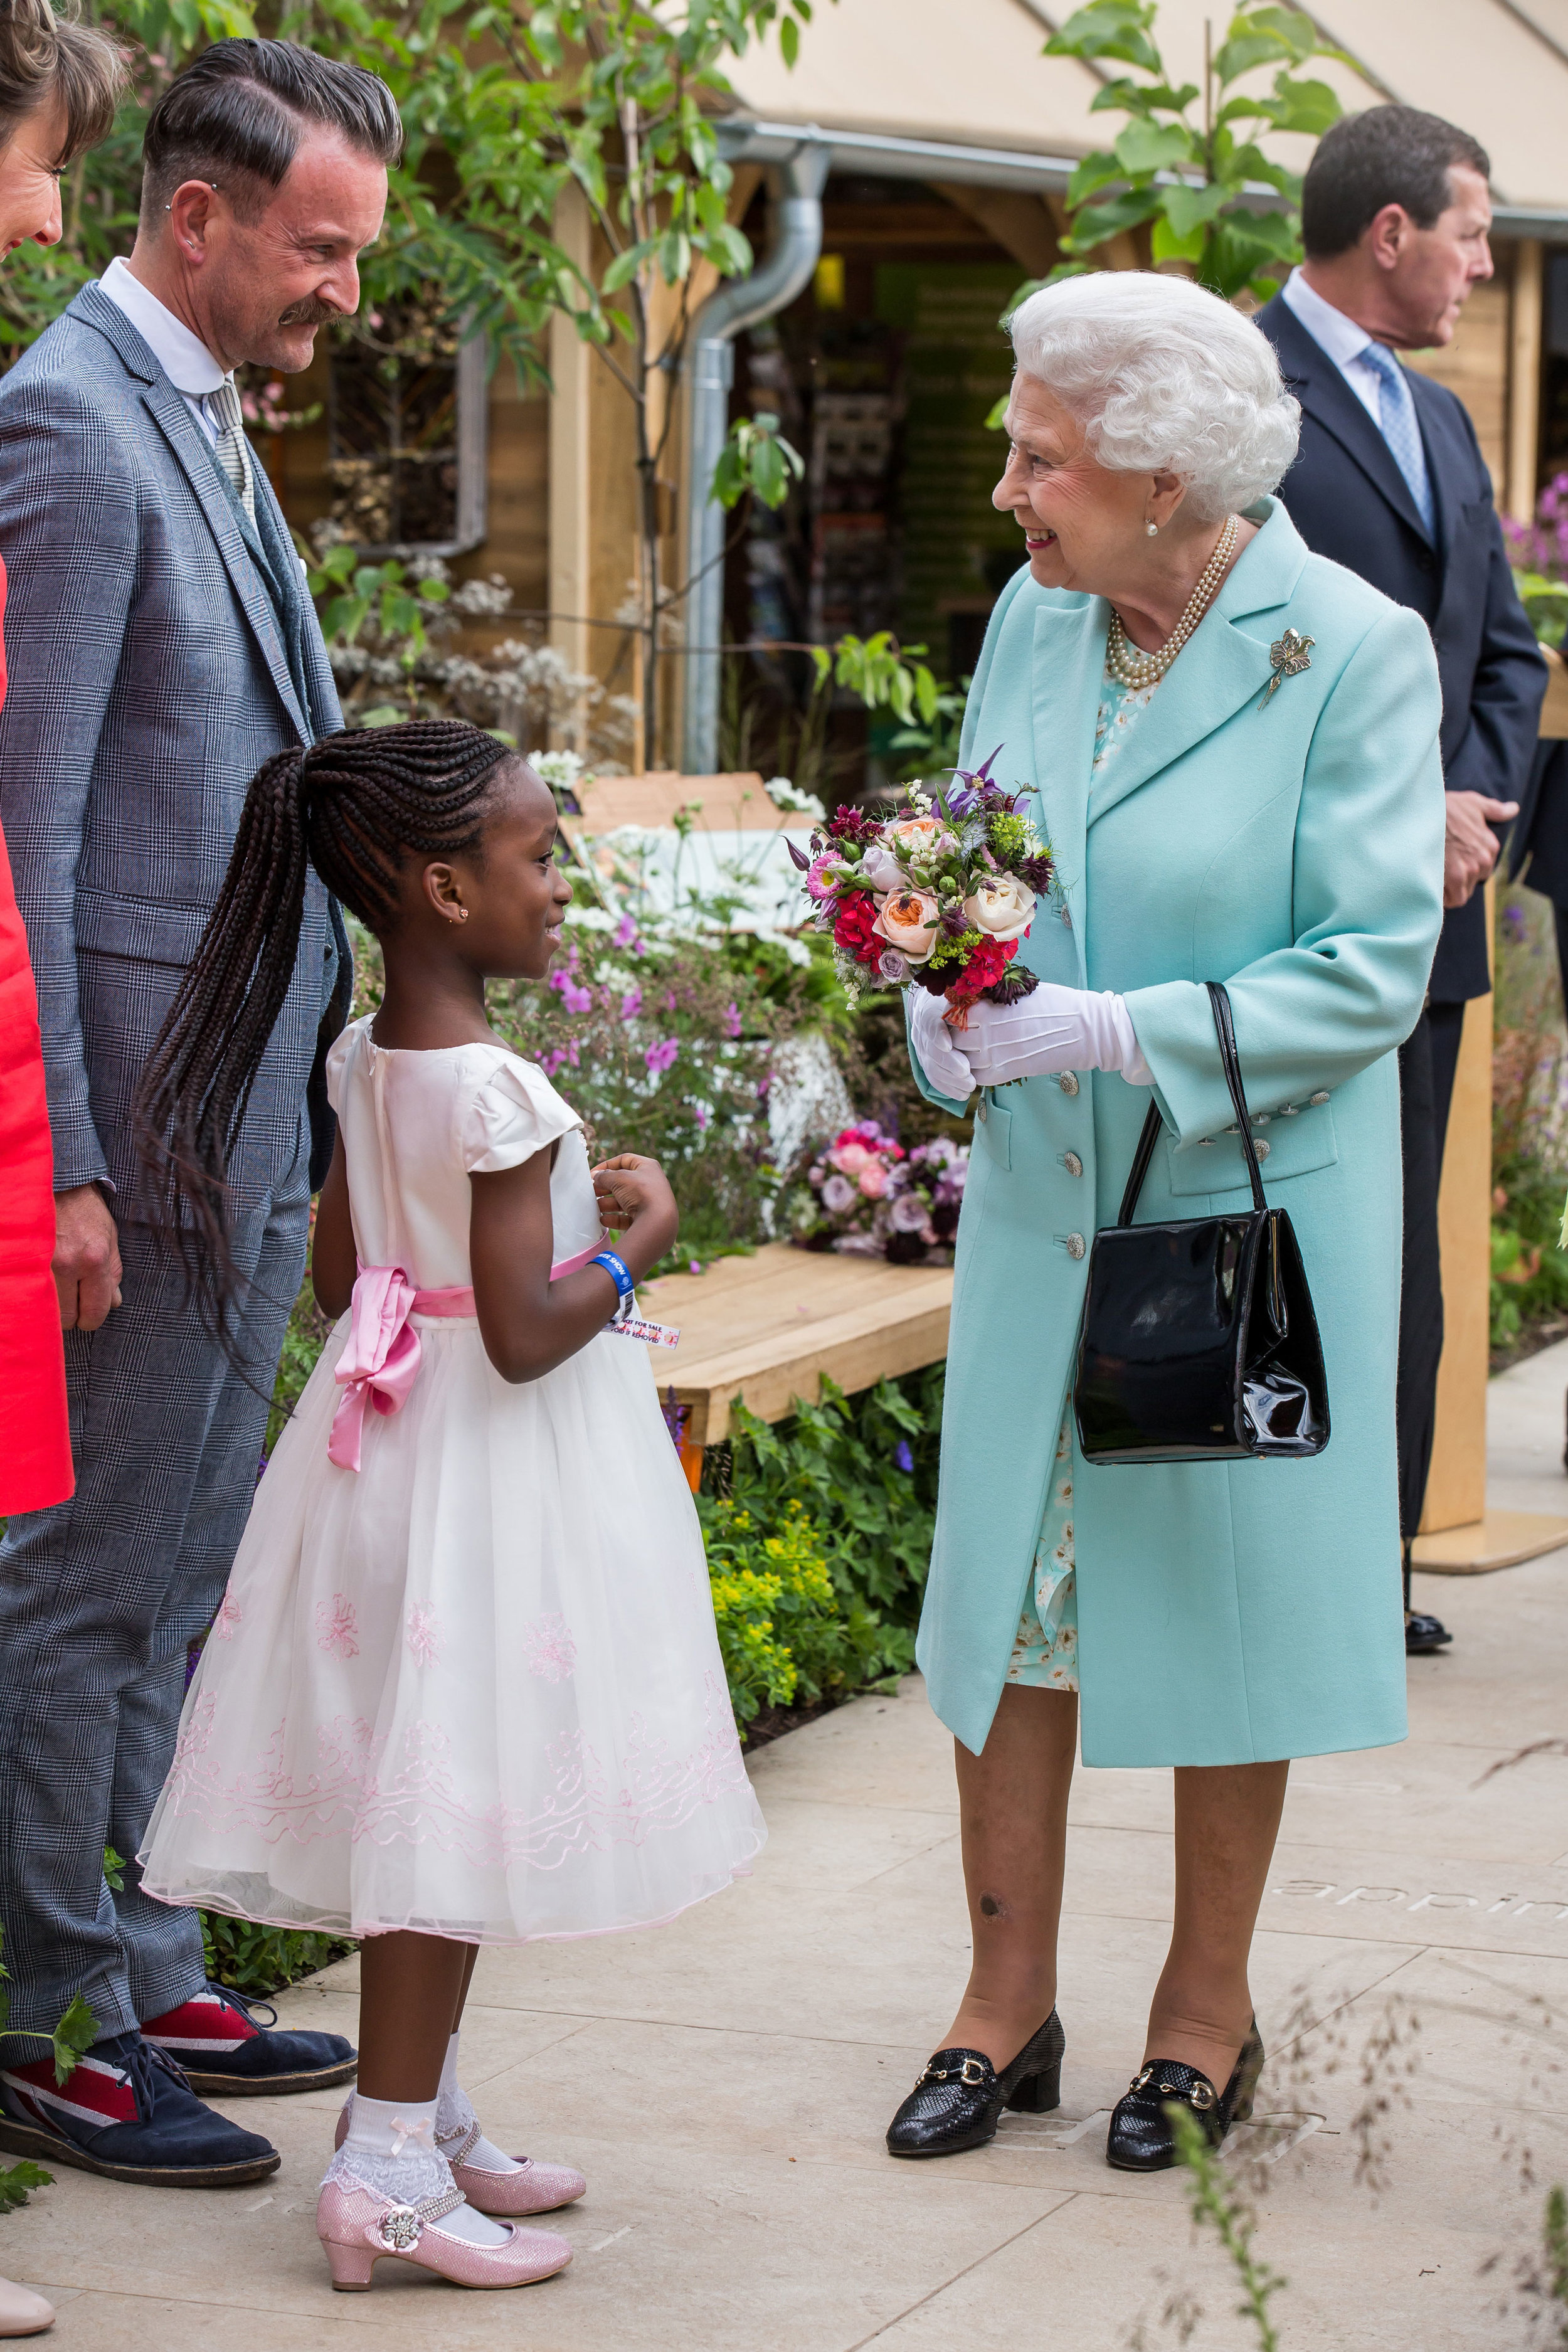 Meeting Her Majesty the Queen at the RHS Chelsea Flower Show